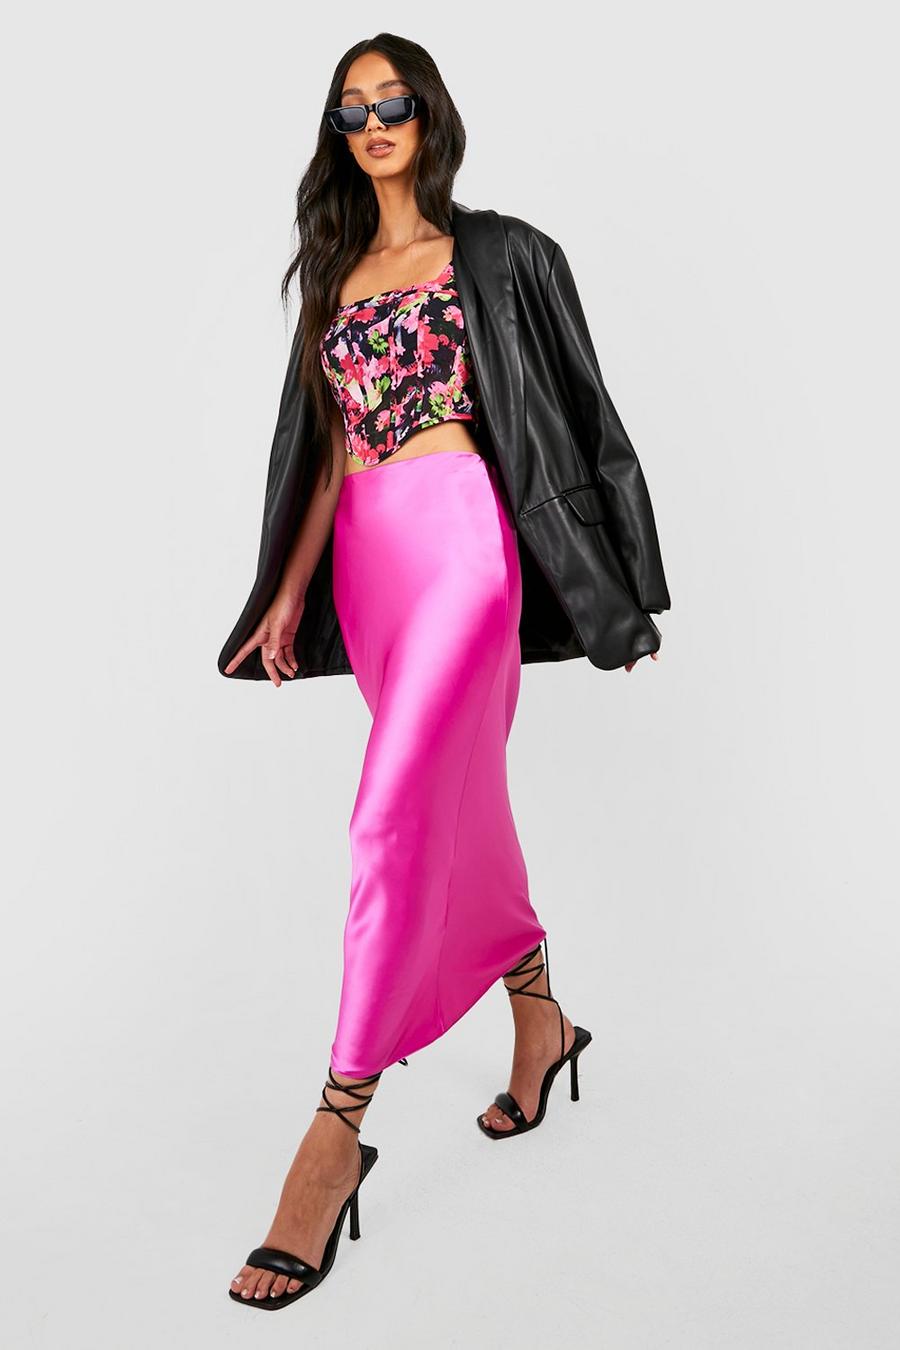 Hot pink New In Clothing 